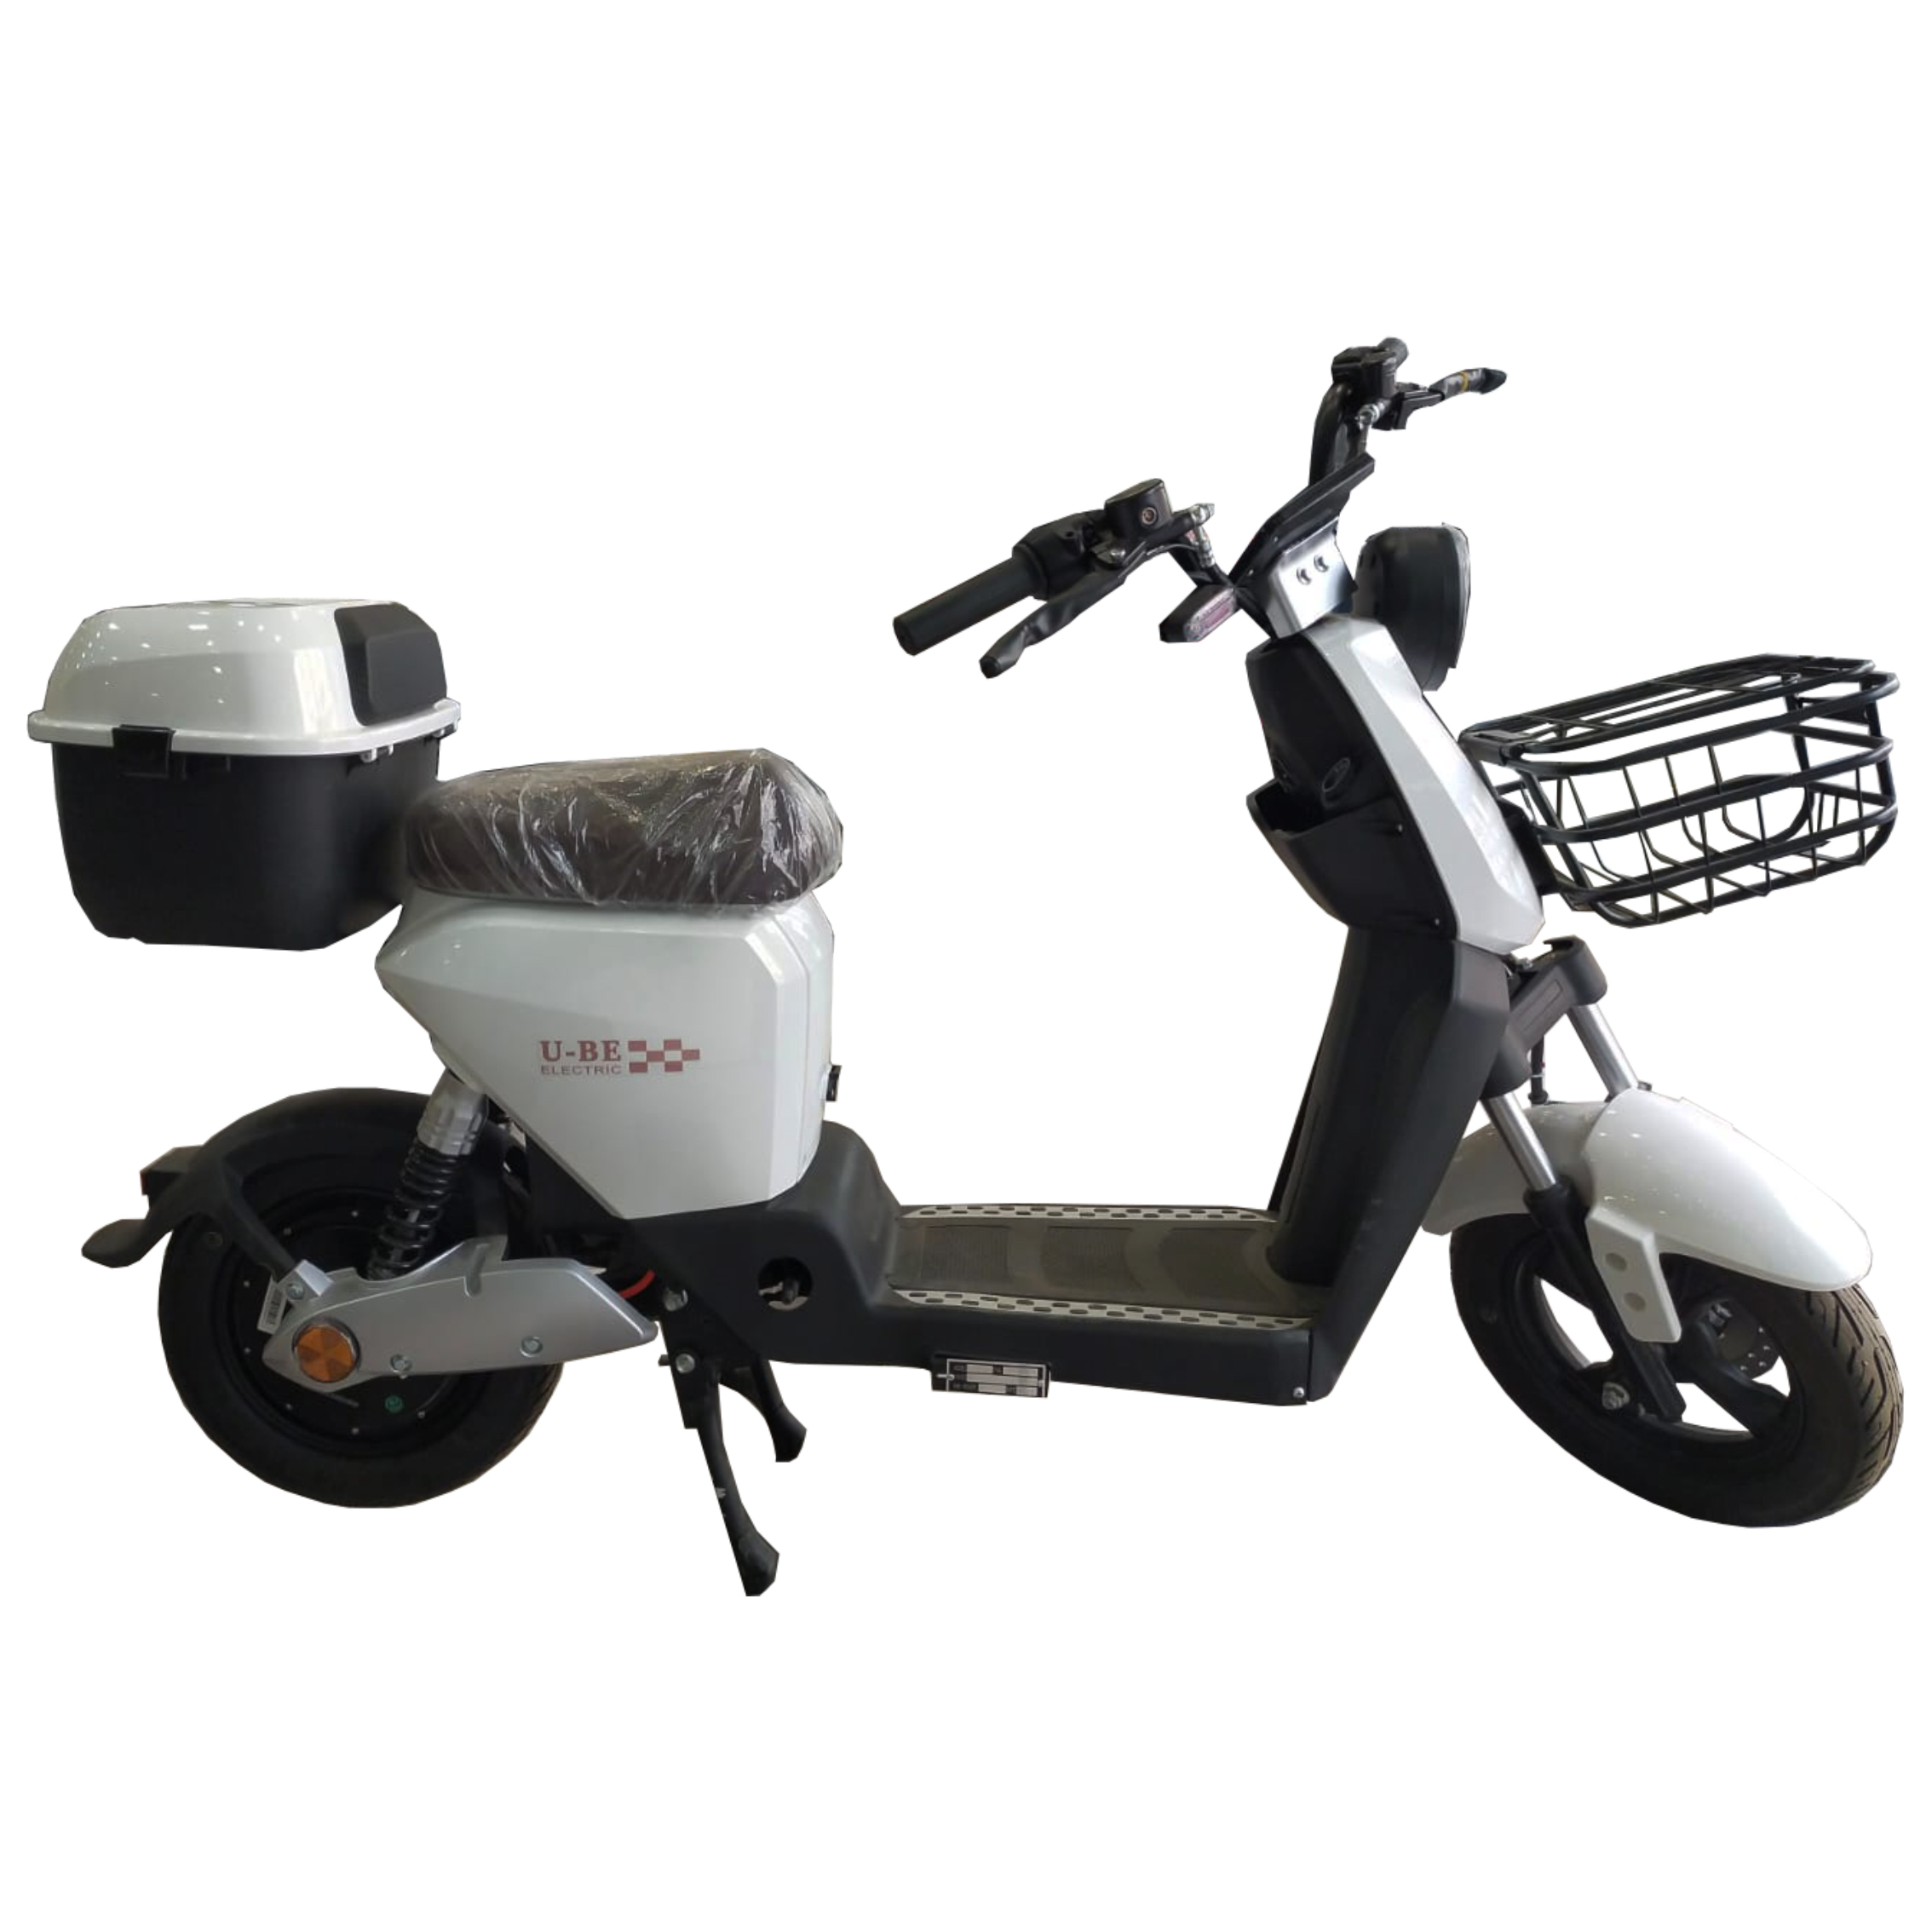 SCOOTER ELECTRIQUE U-BE NEO TECHNOLOGY - BLANC 